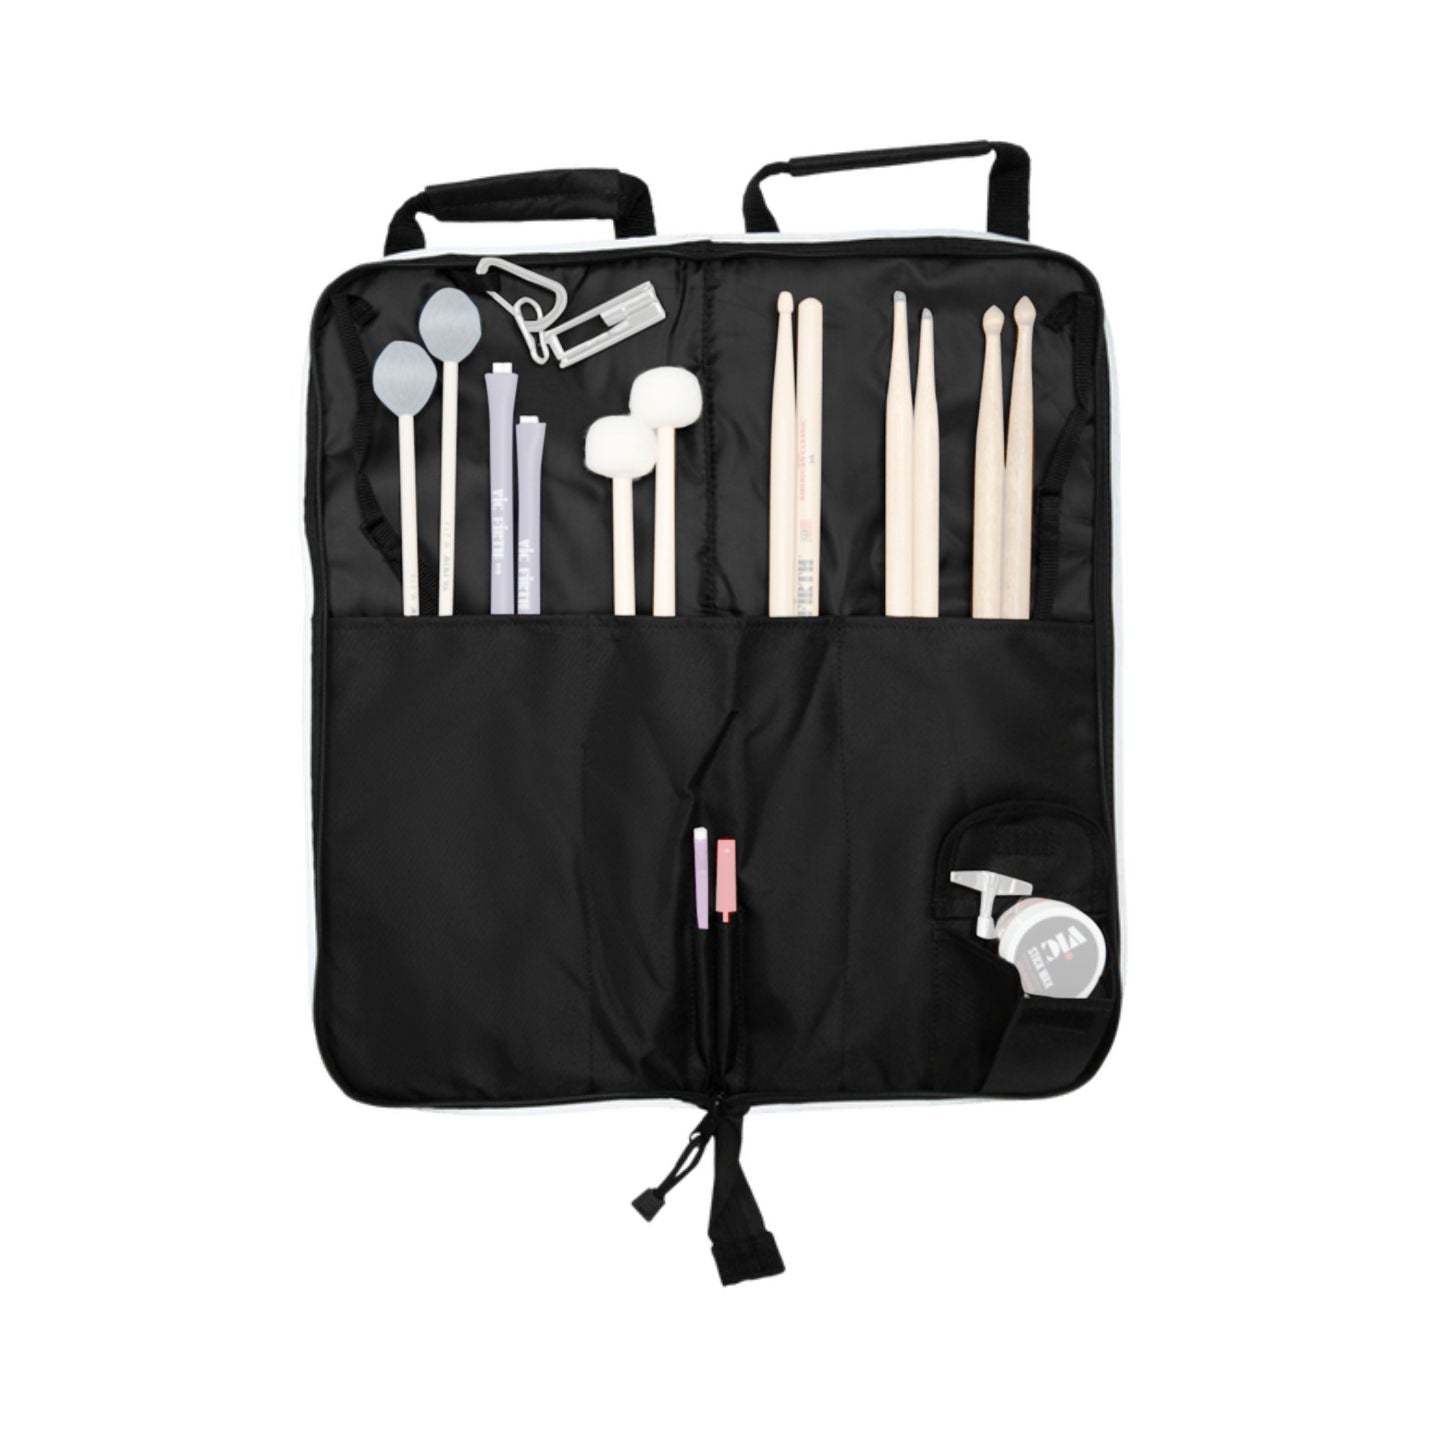 Vic Firth Classic Drumstick Bag with 600D Nylon Construction, Heavy Duty Zippers, Removable Shoulder Strap | VFCSB